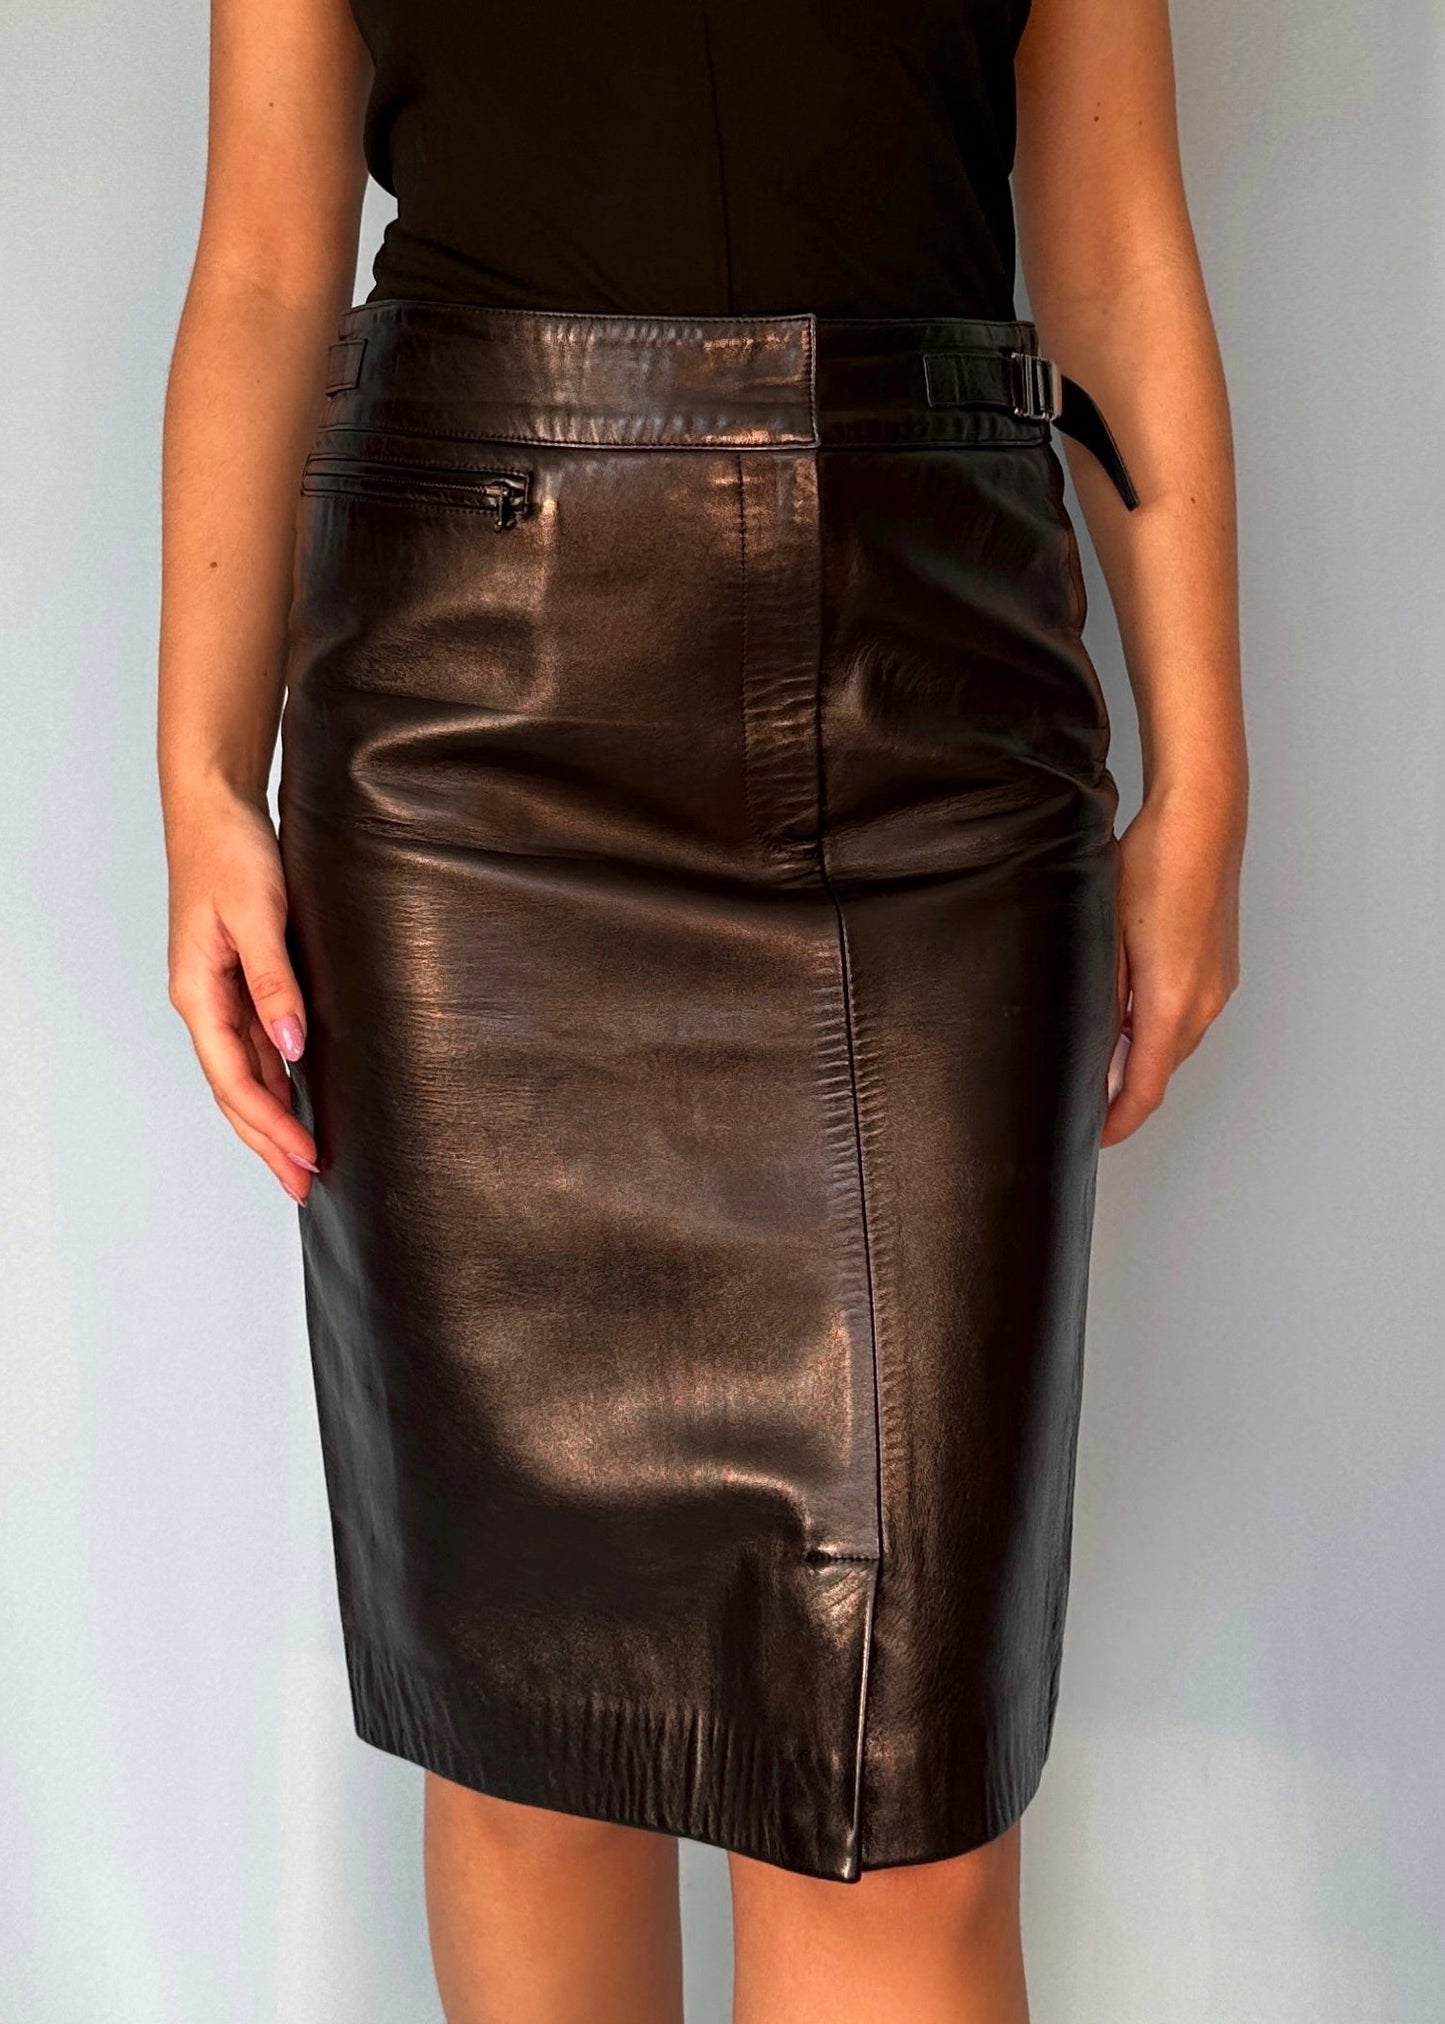 Gucci Fall 1998 Leather Buckle Detail Skirt